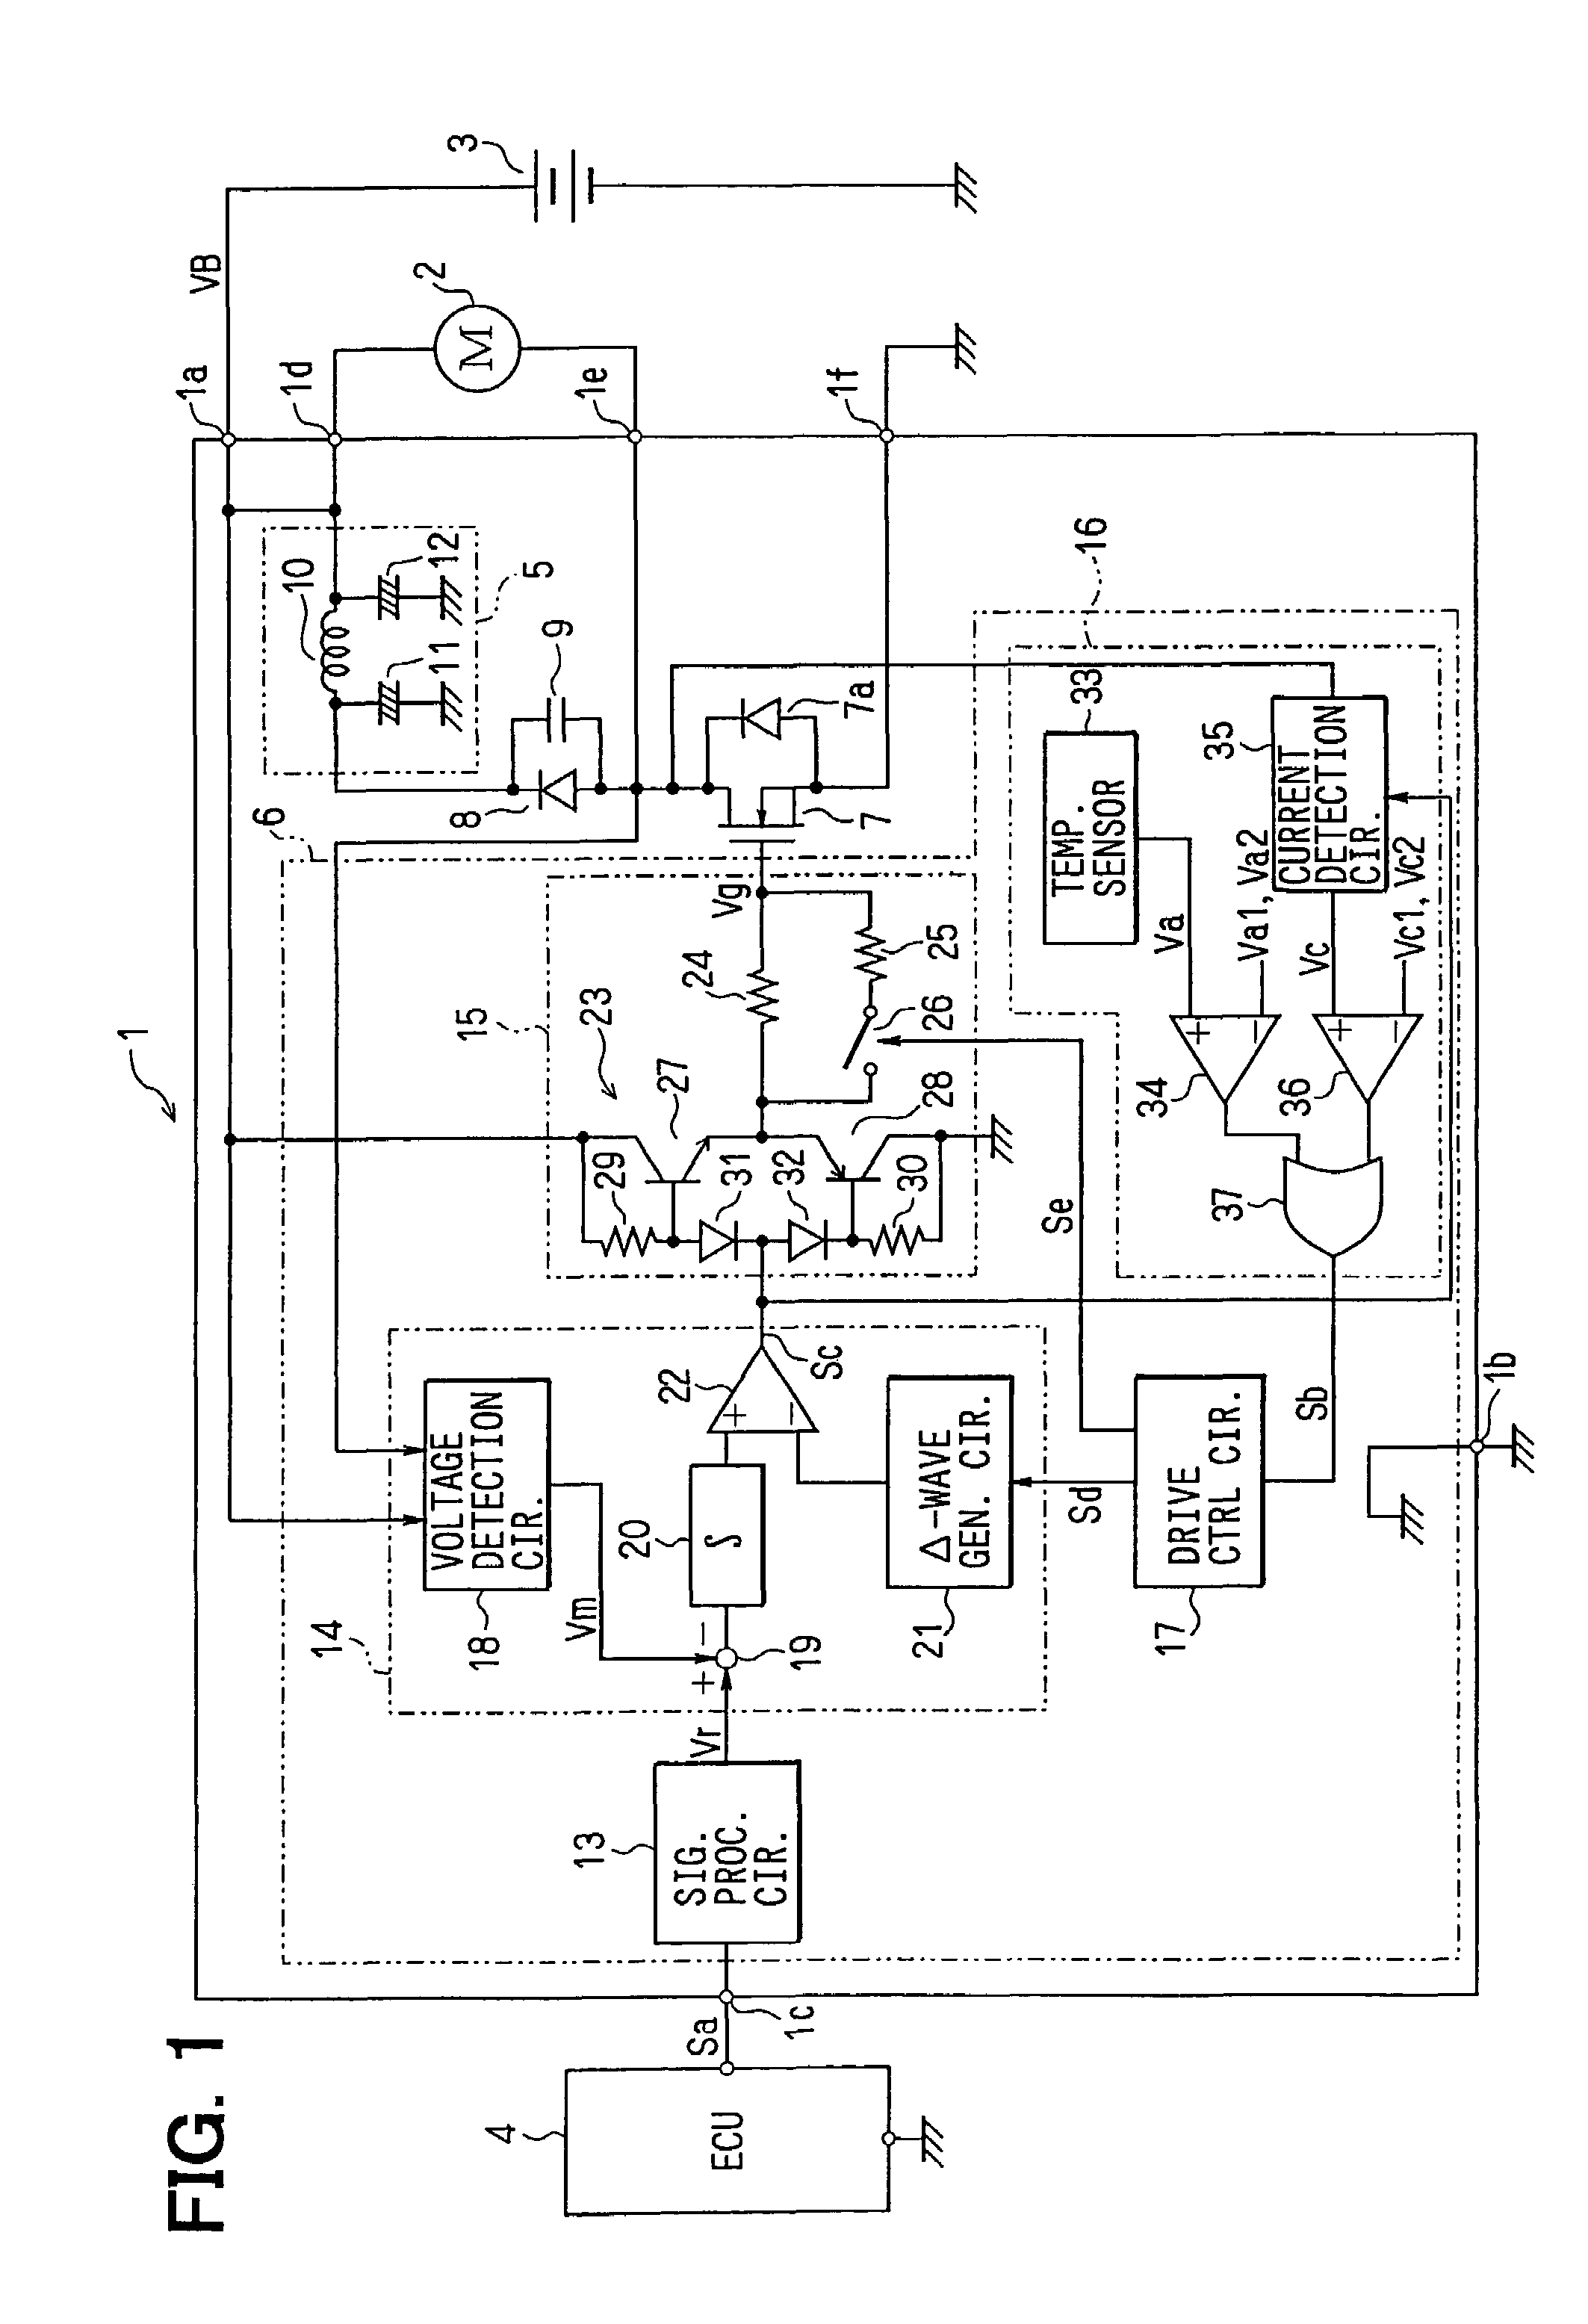 Motor driving device